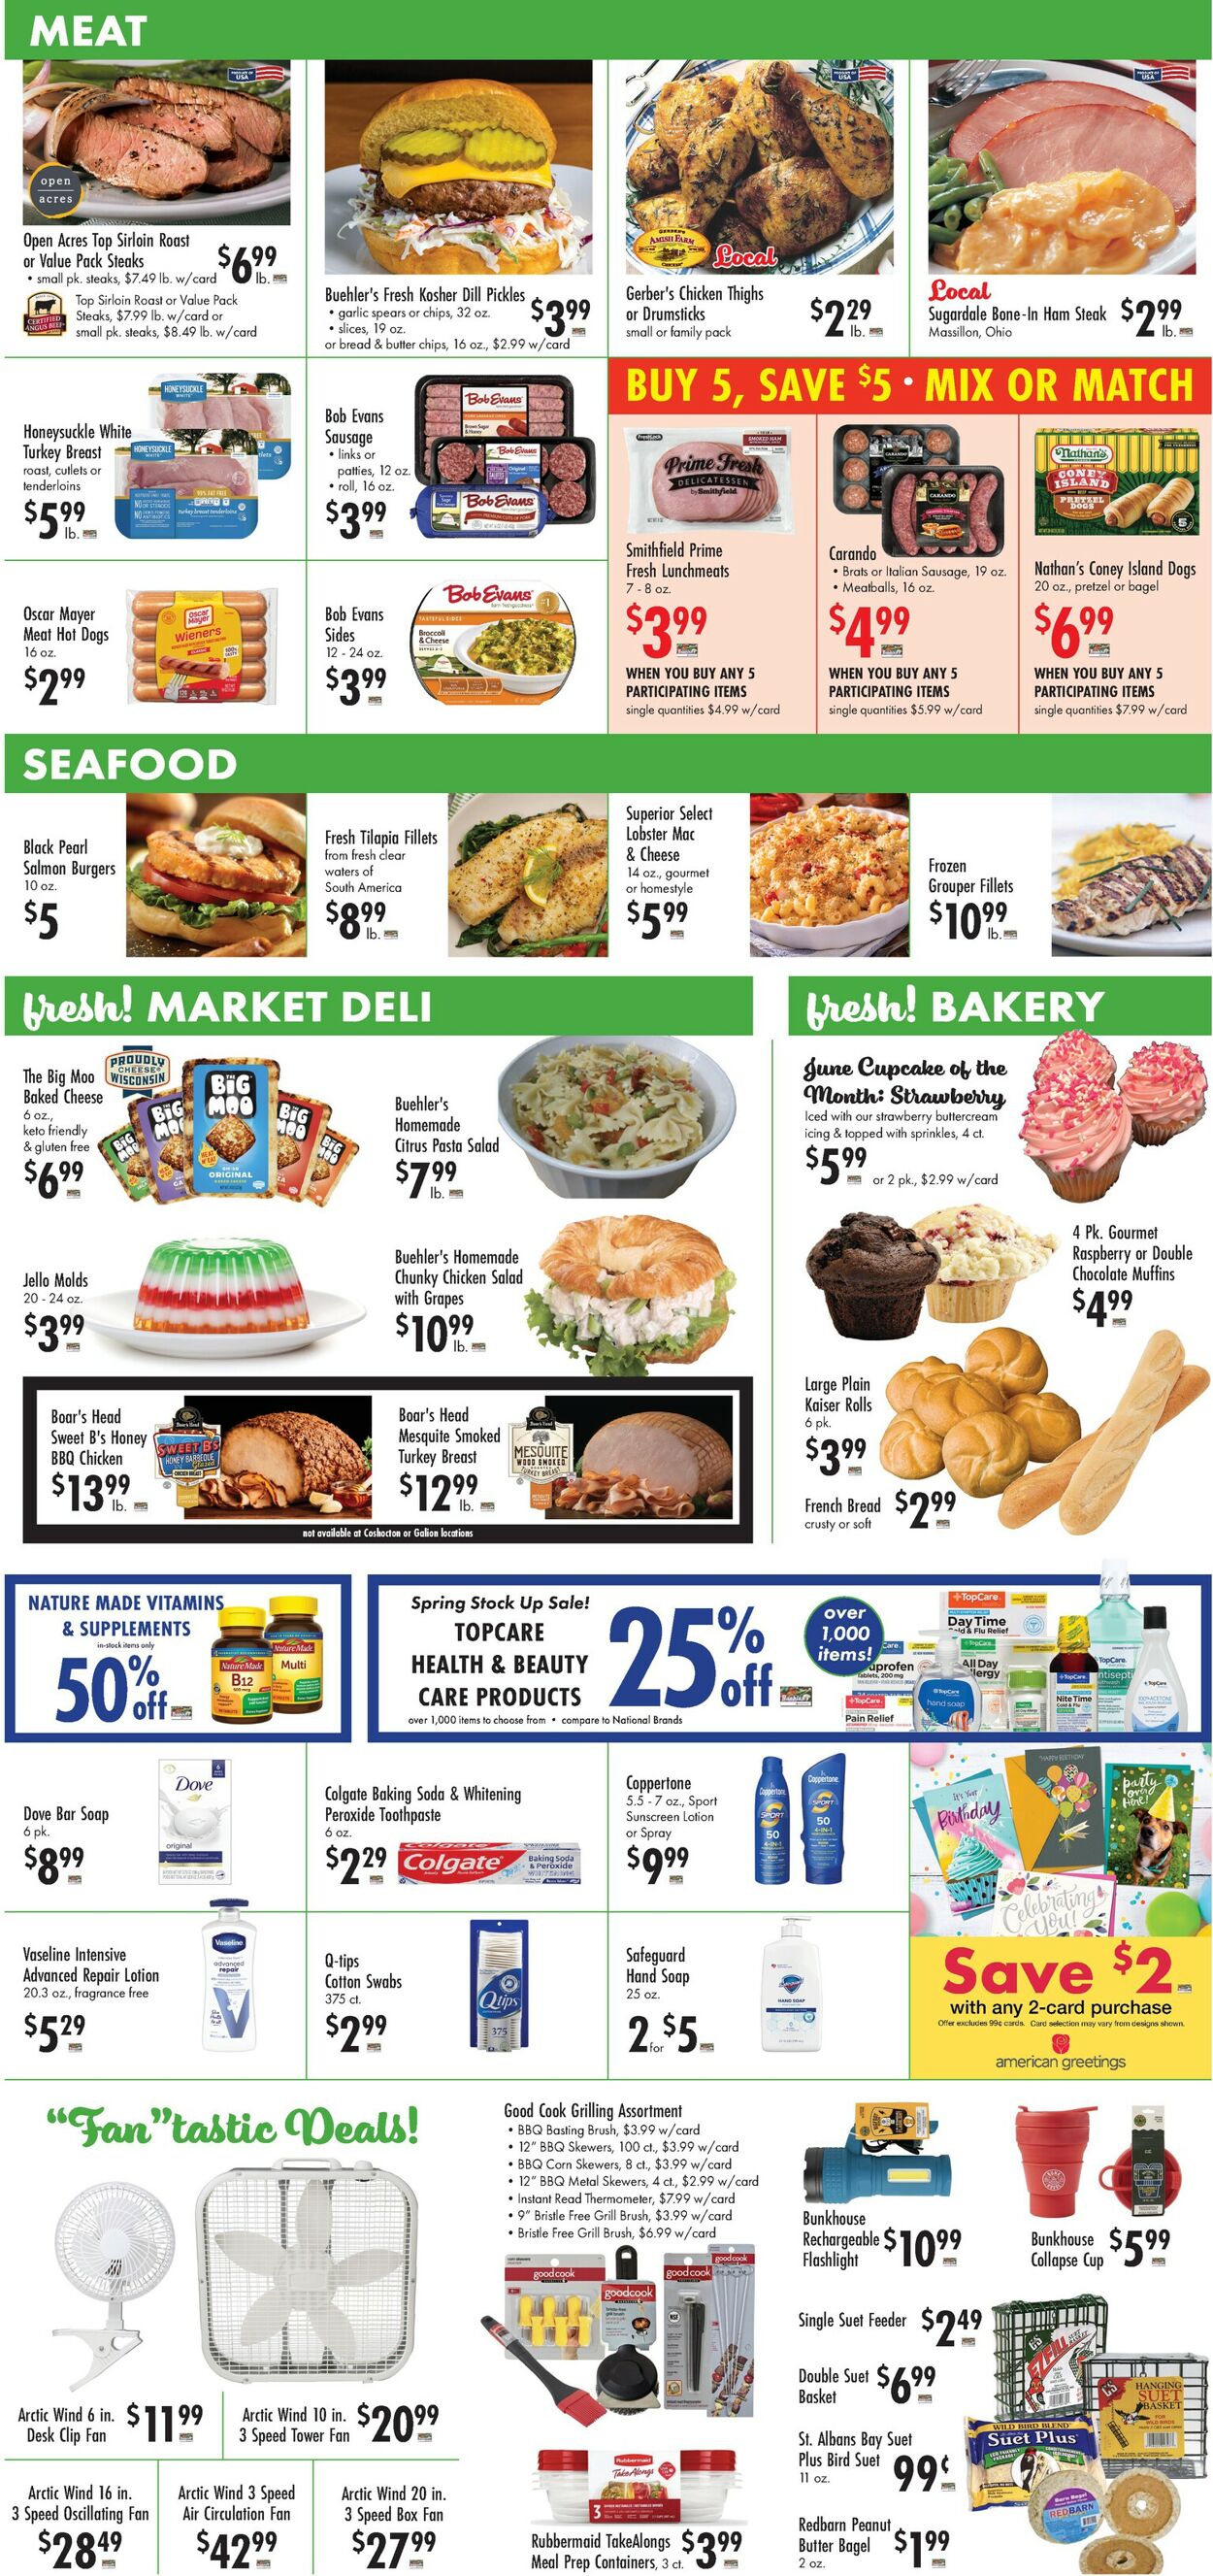 Catalogue Buehler's Fresh Foods from 06/05/2024